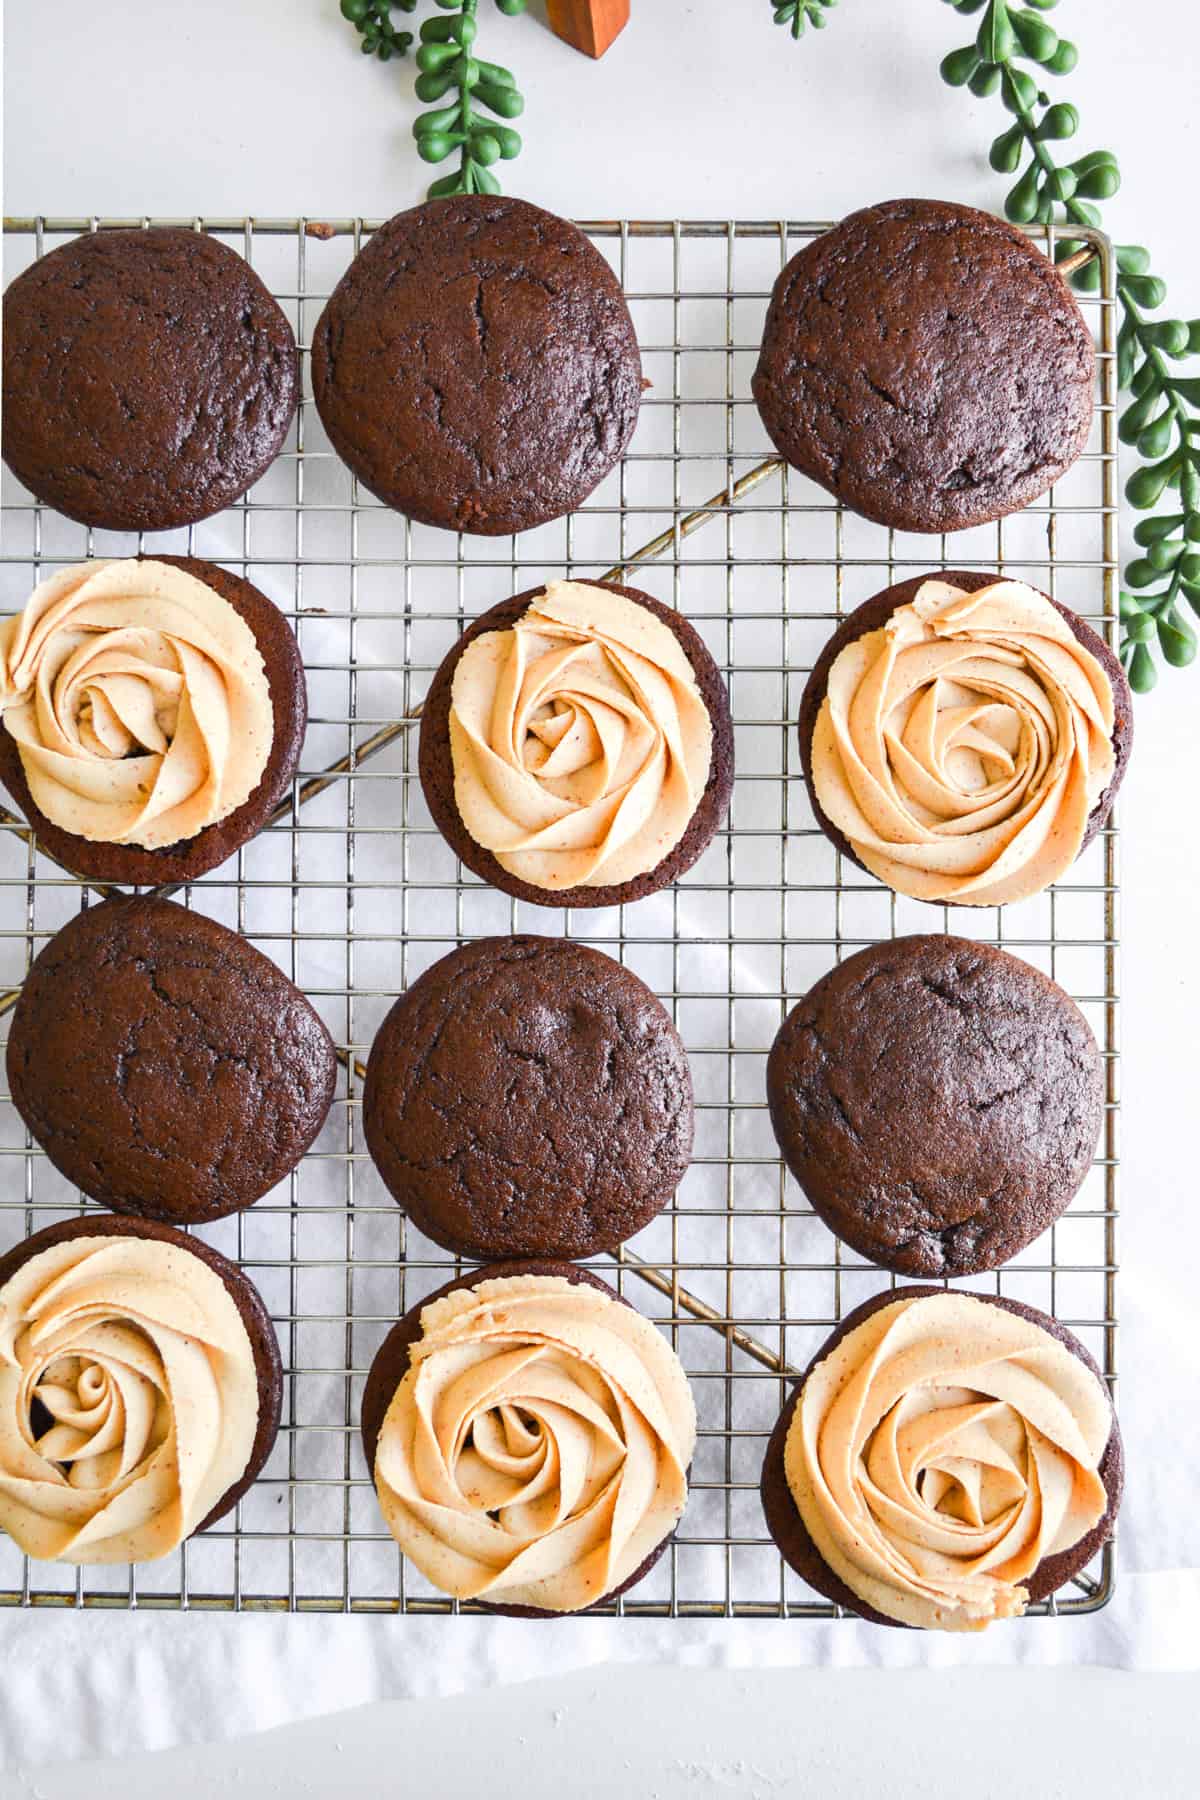 Chocolate whoopie pies with frosting rosettes on top.